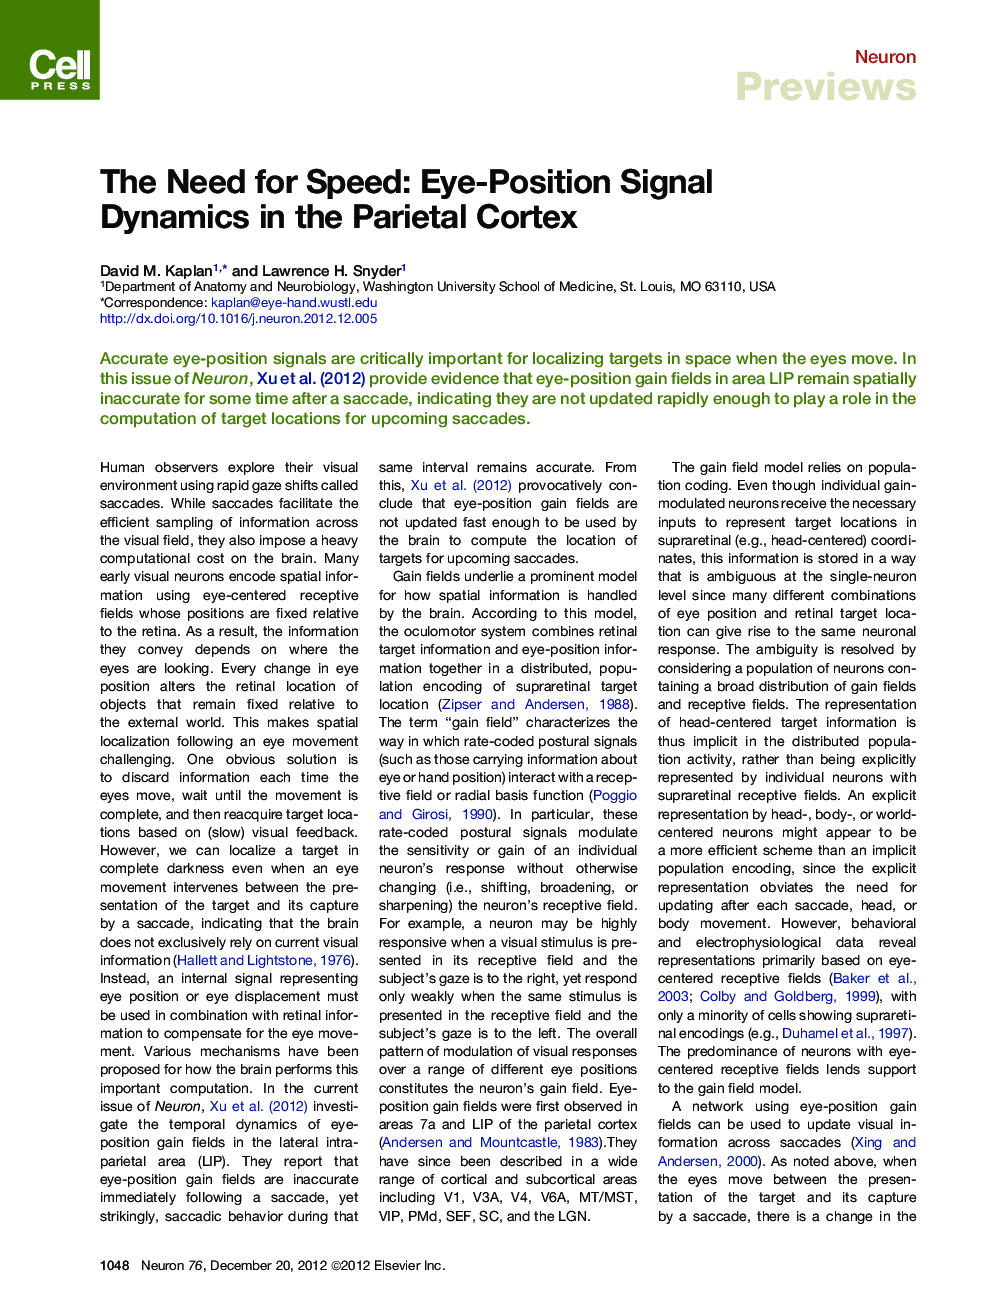 The Need for Speed: Eye-Position Signal Dynamics in the Parietal Cortex